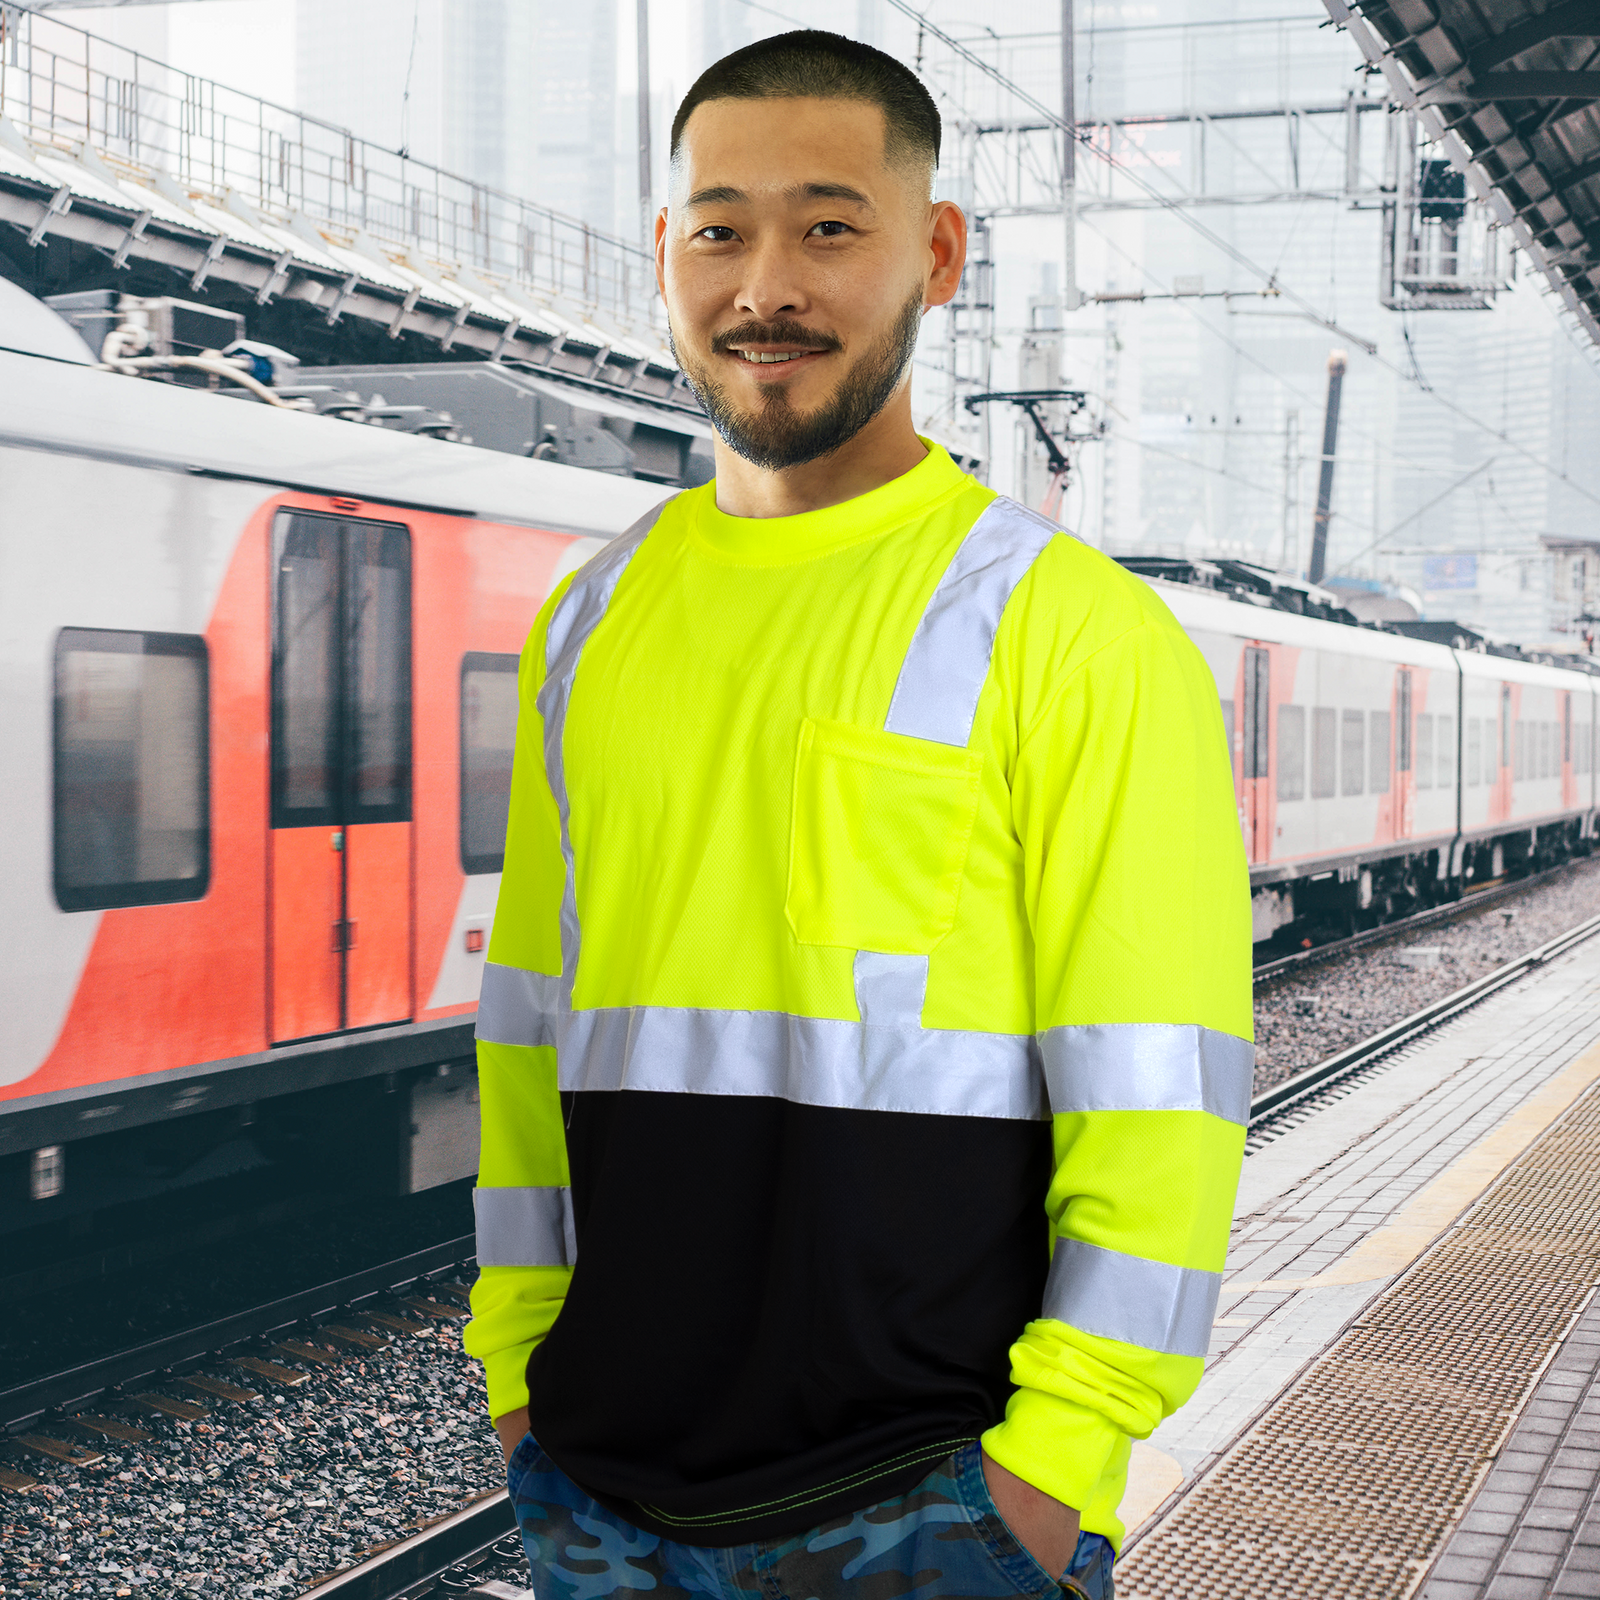 Worker in a train station wearing high vis reflective dirt concealing safety long sleeve shirt